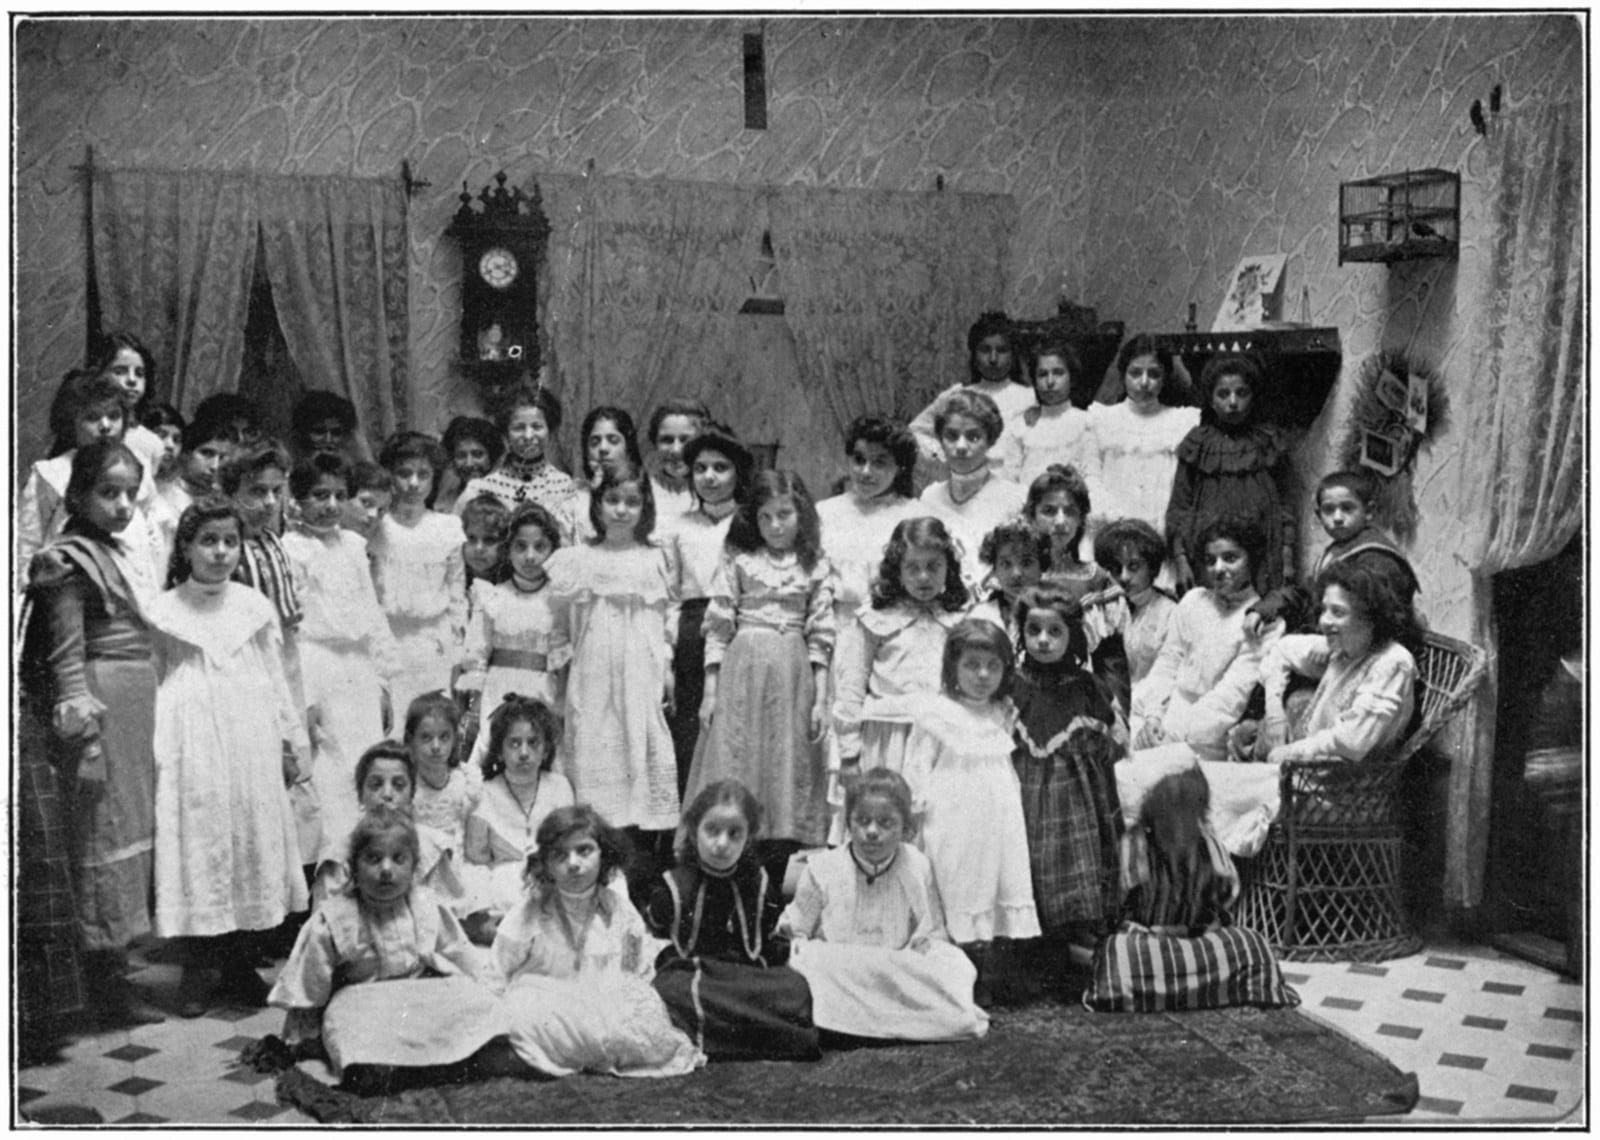 Stella Corcos’ girls’ school in Mogador, Morocco, 1885-1900c., The Corcos Family Archive, Jerusalem. Courtesy of Sidney Corcos.